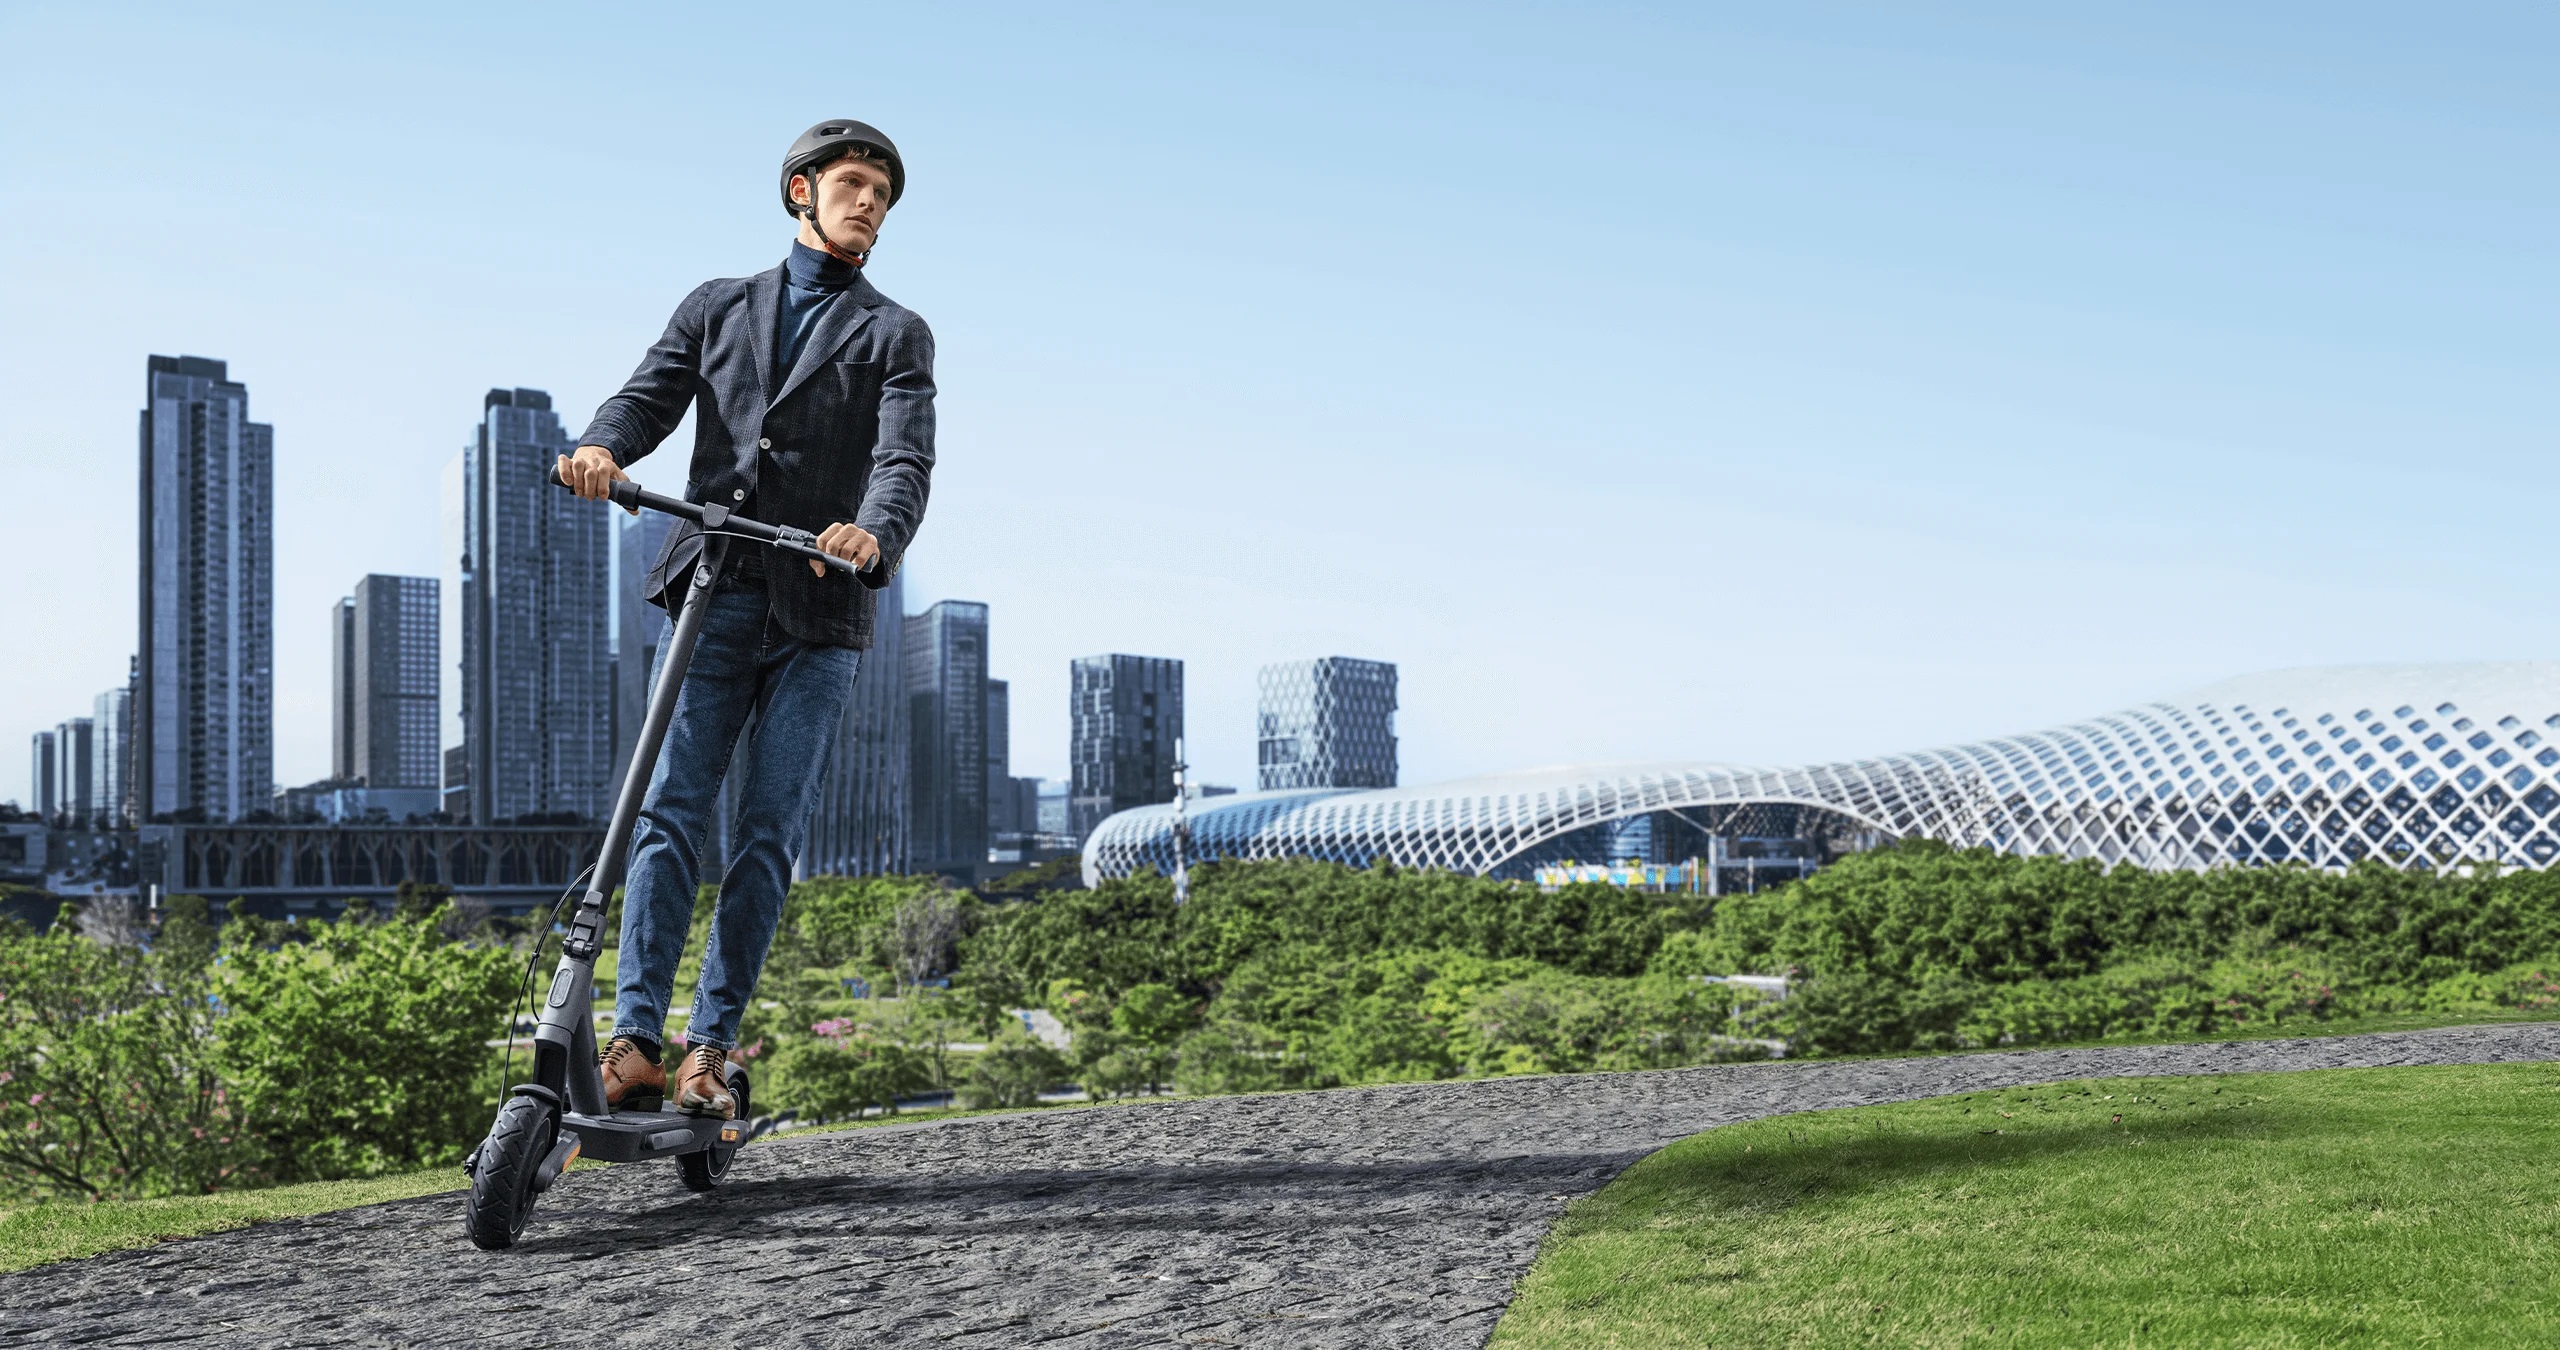 Xiaomi Electric Scooter 4 Ultra: a dual-suspension electric scooter with a range of up to 70km for €1000